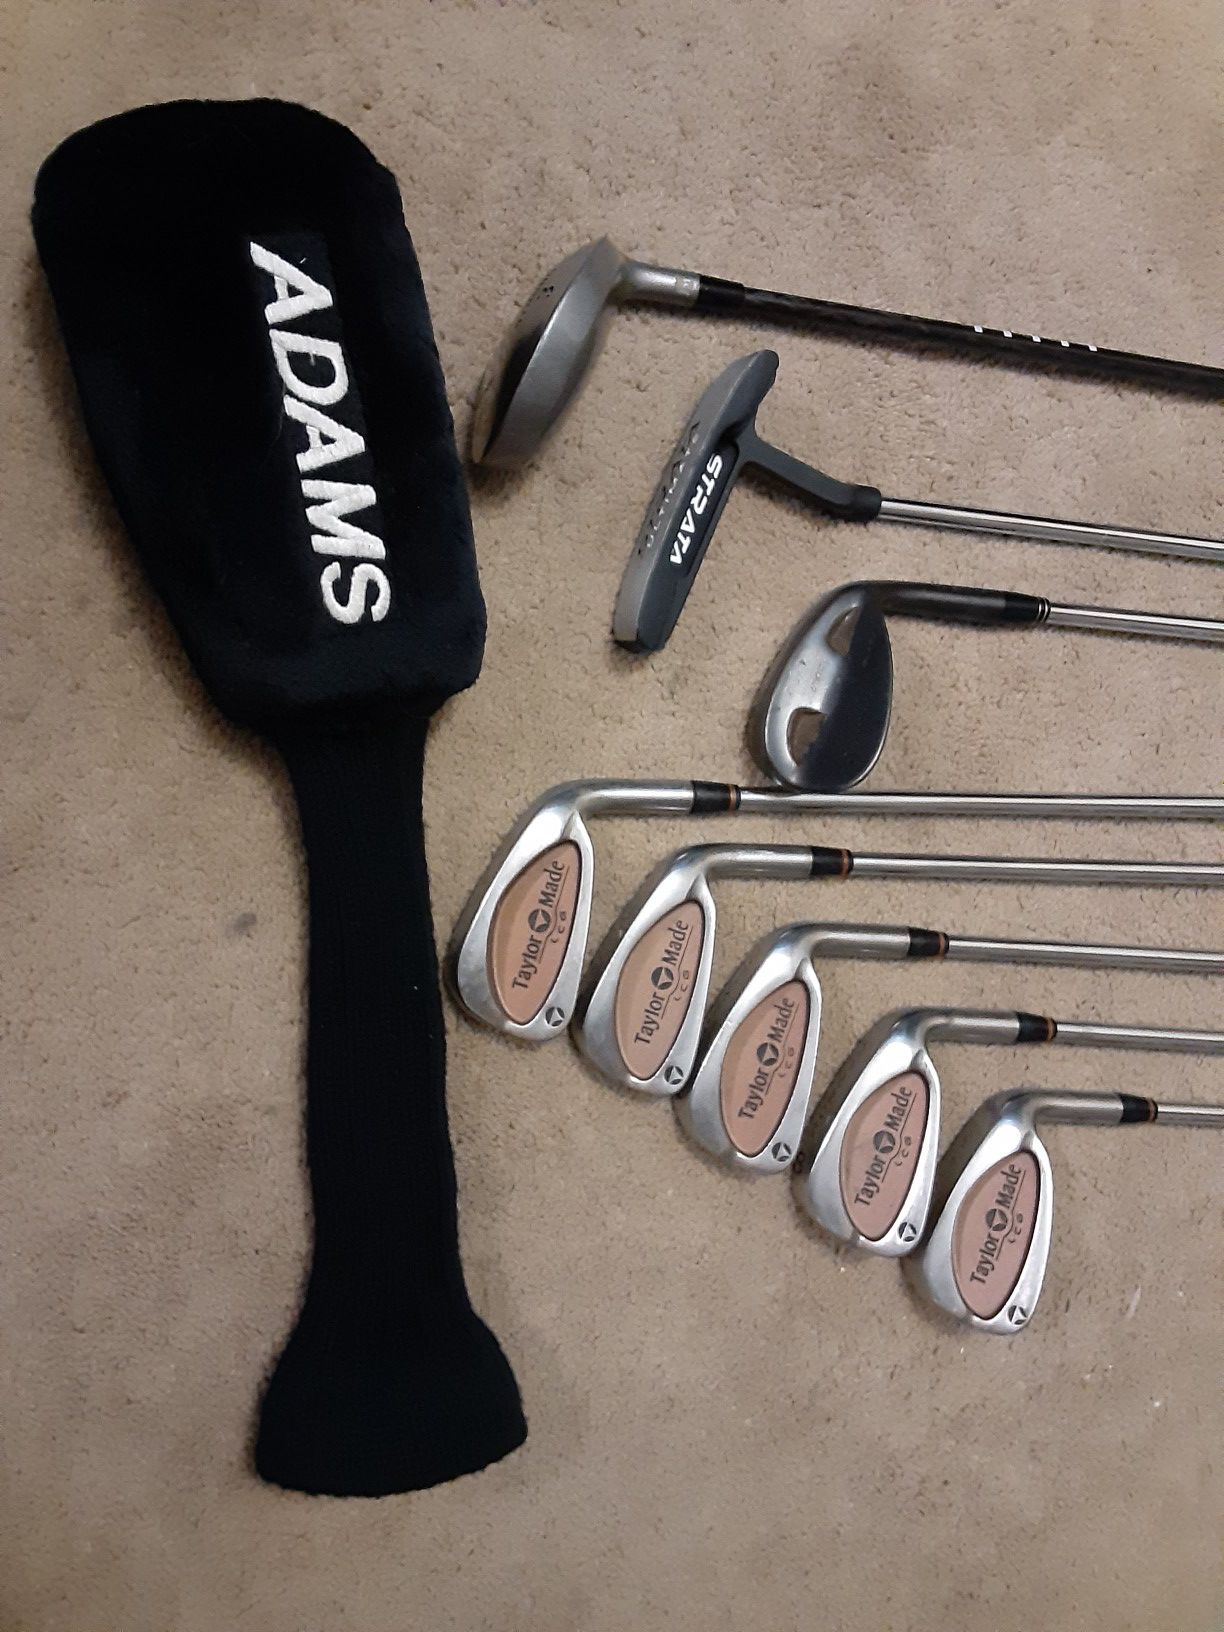 Taylor's Made irons Golf clubs Adam's Strata & new bag